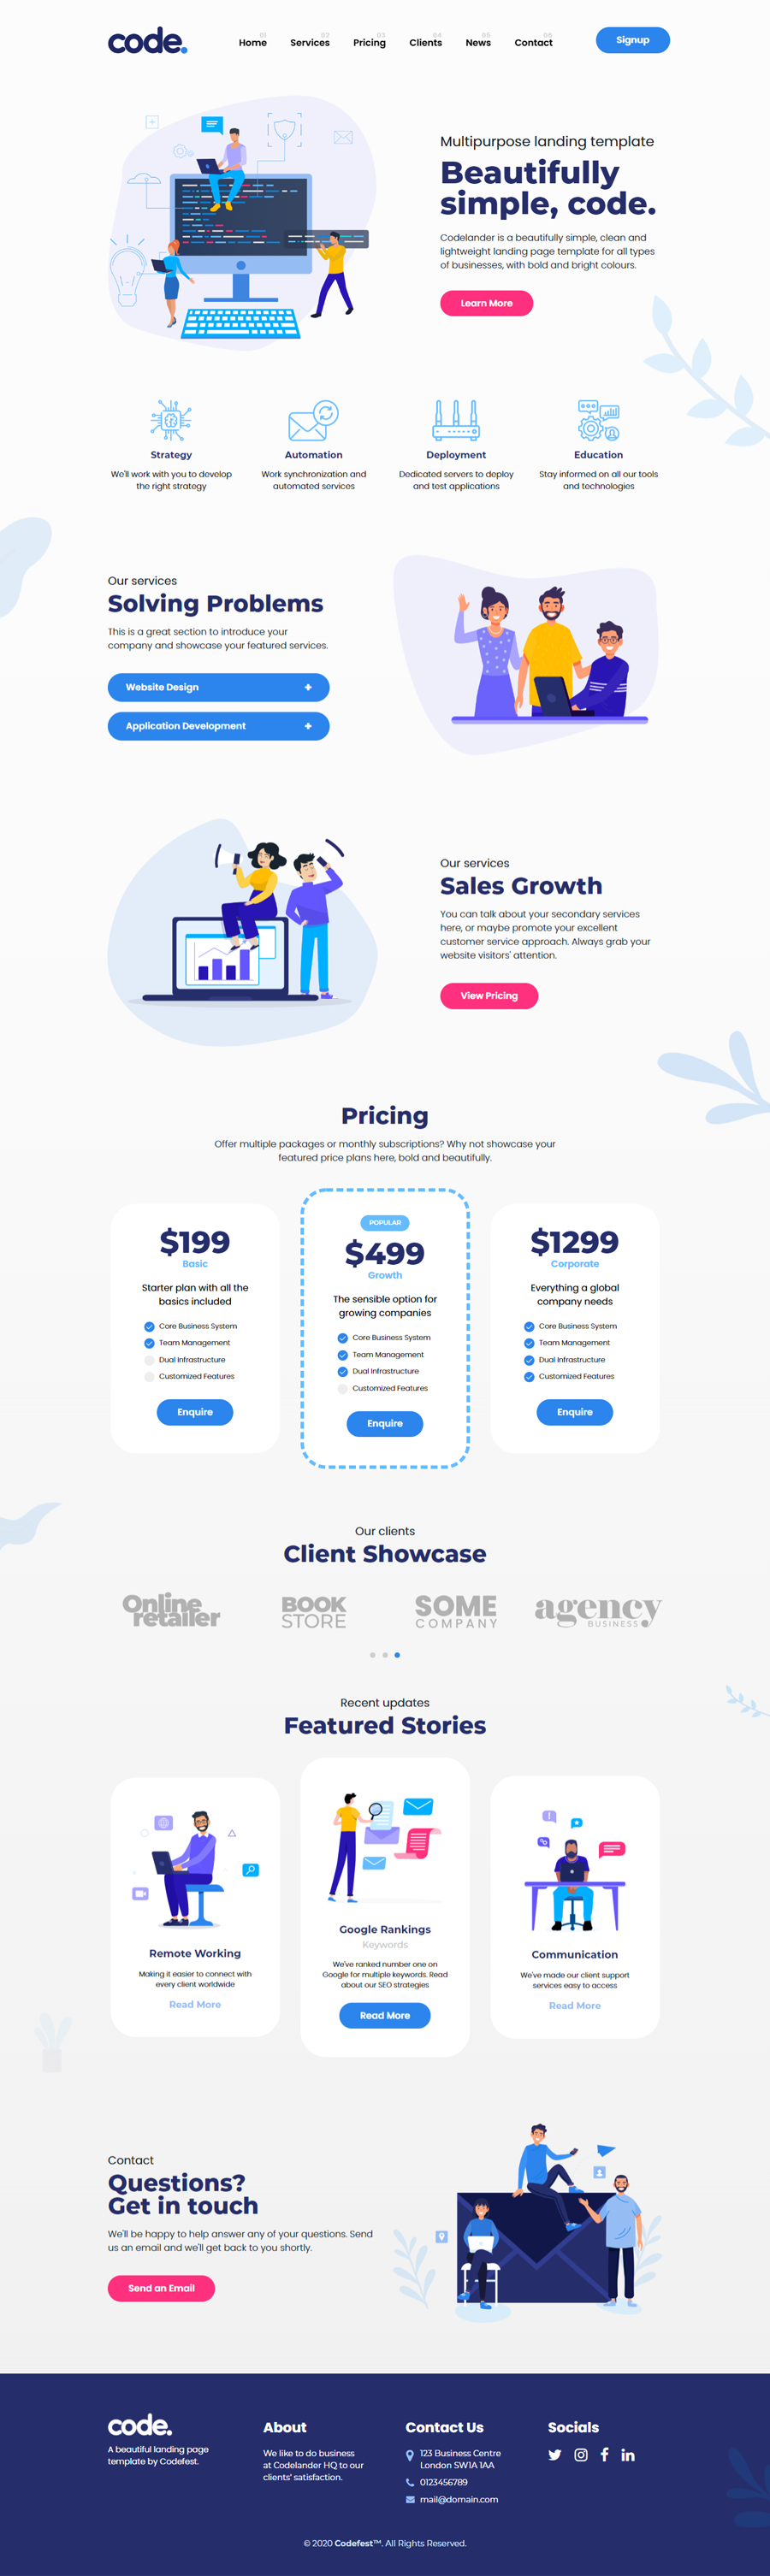 CODELANDER - Multi-Purpose HTML Landing Page Template for Business and Startups - 1